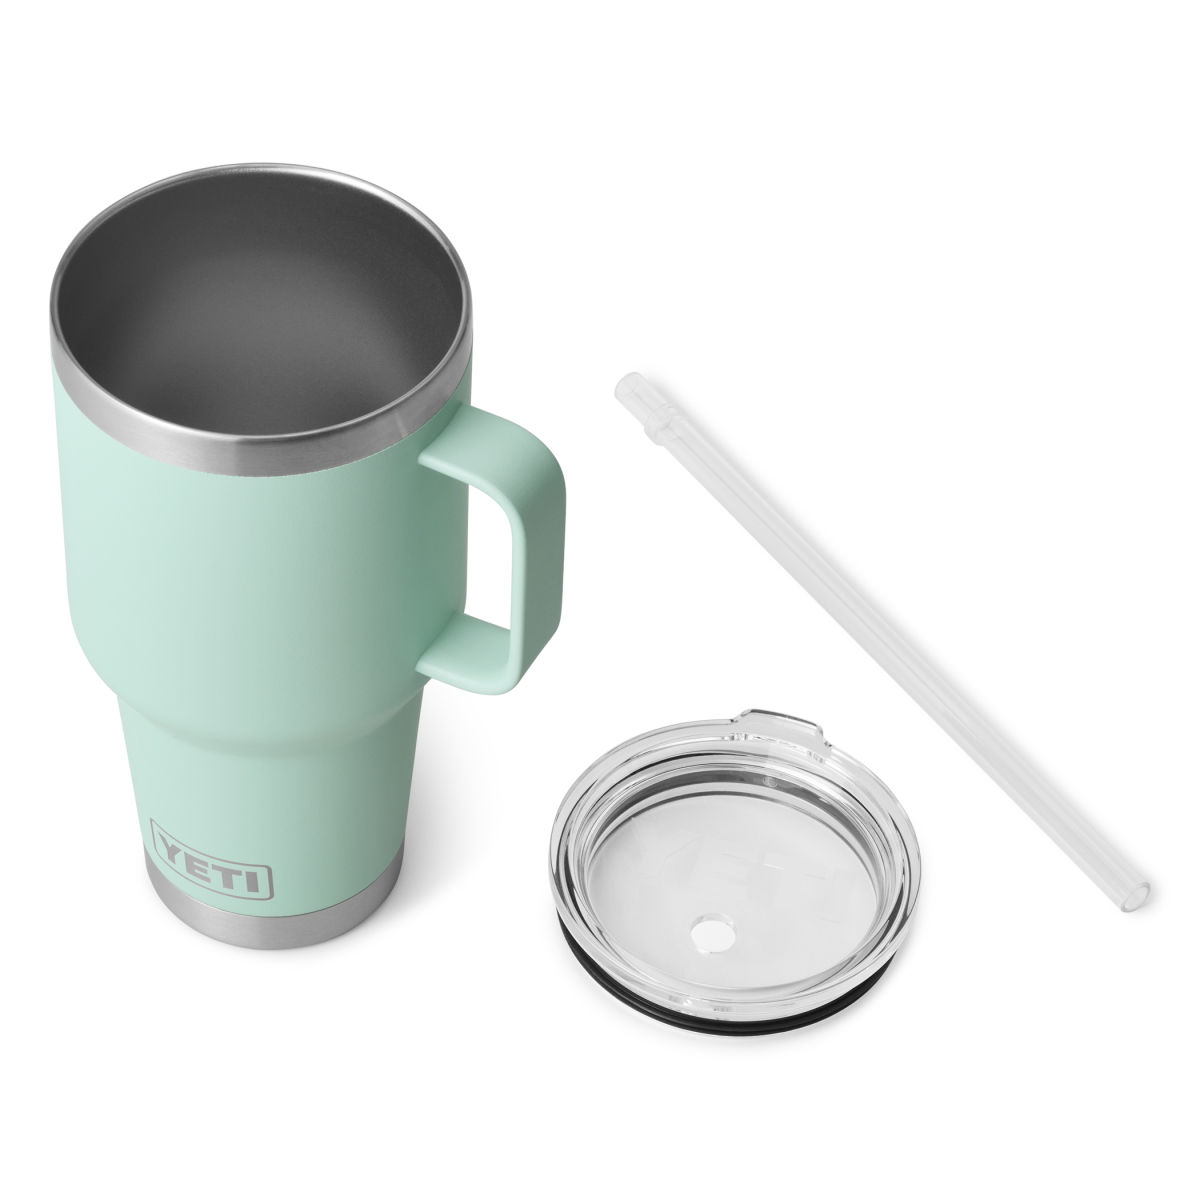 YETI Rambler Straw Cup Silver - Slam Jam® Official Store